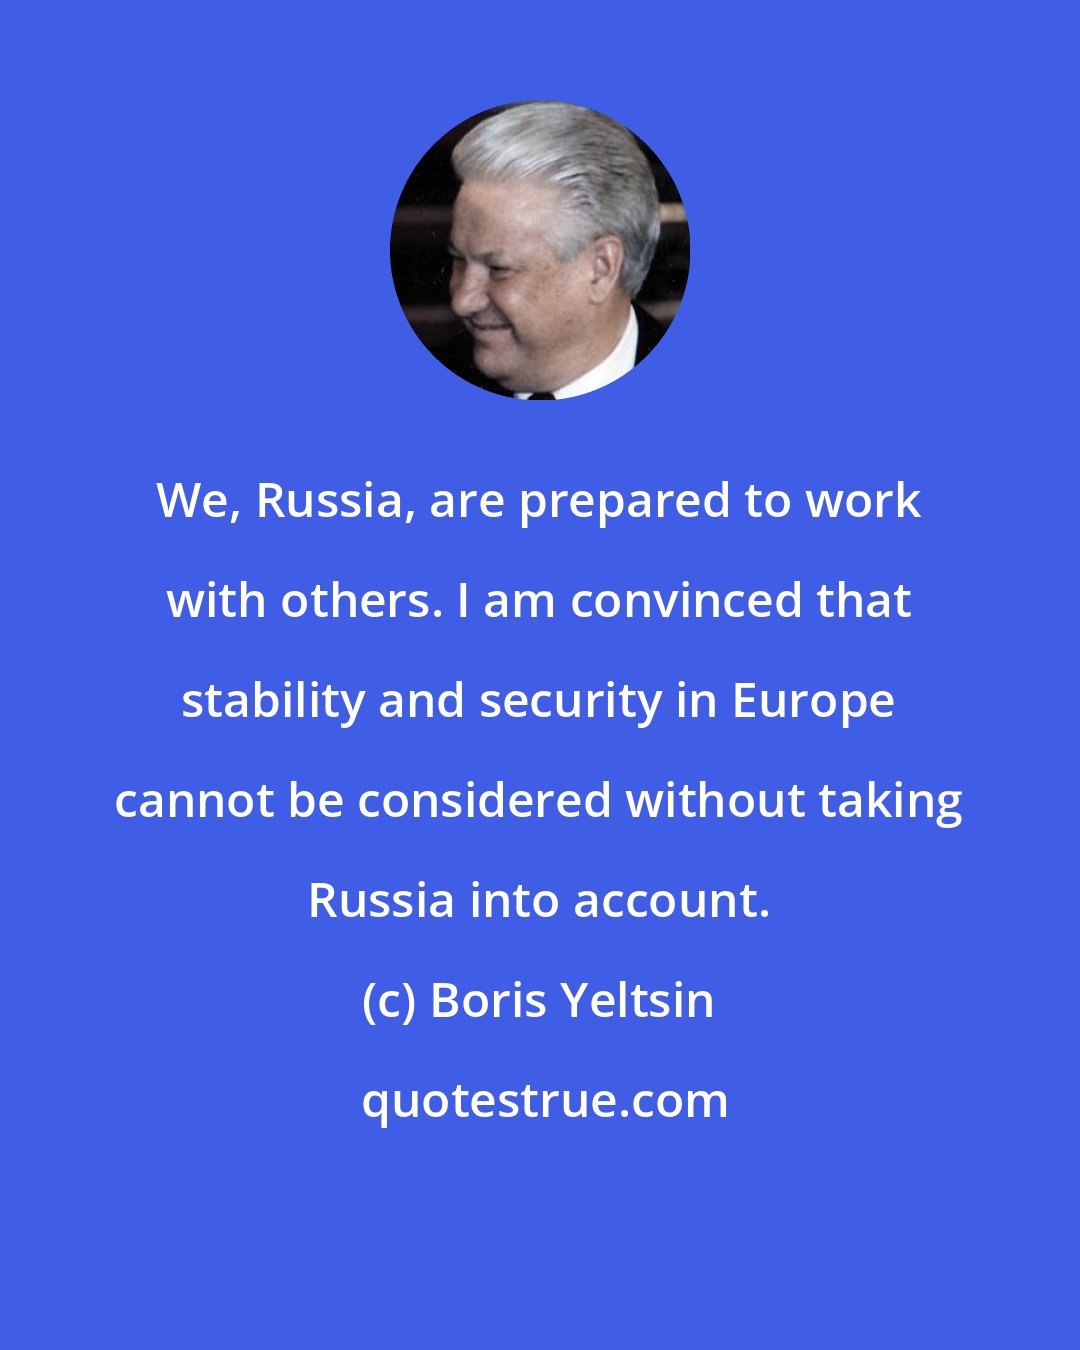 Boris Yeltsin: We, Russia, are prepared to work with others. I am convinced that stability and security in Europe cannot be considered without taking Russia into account.